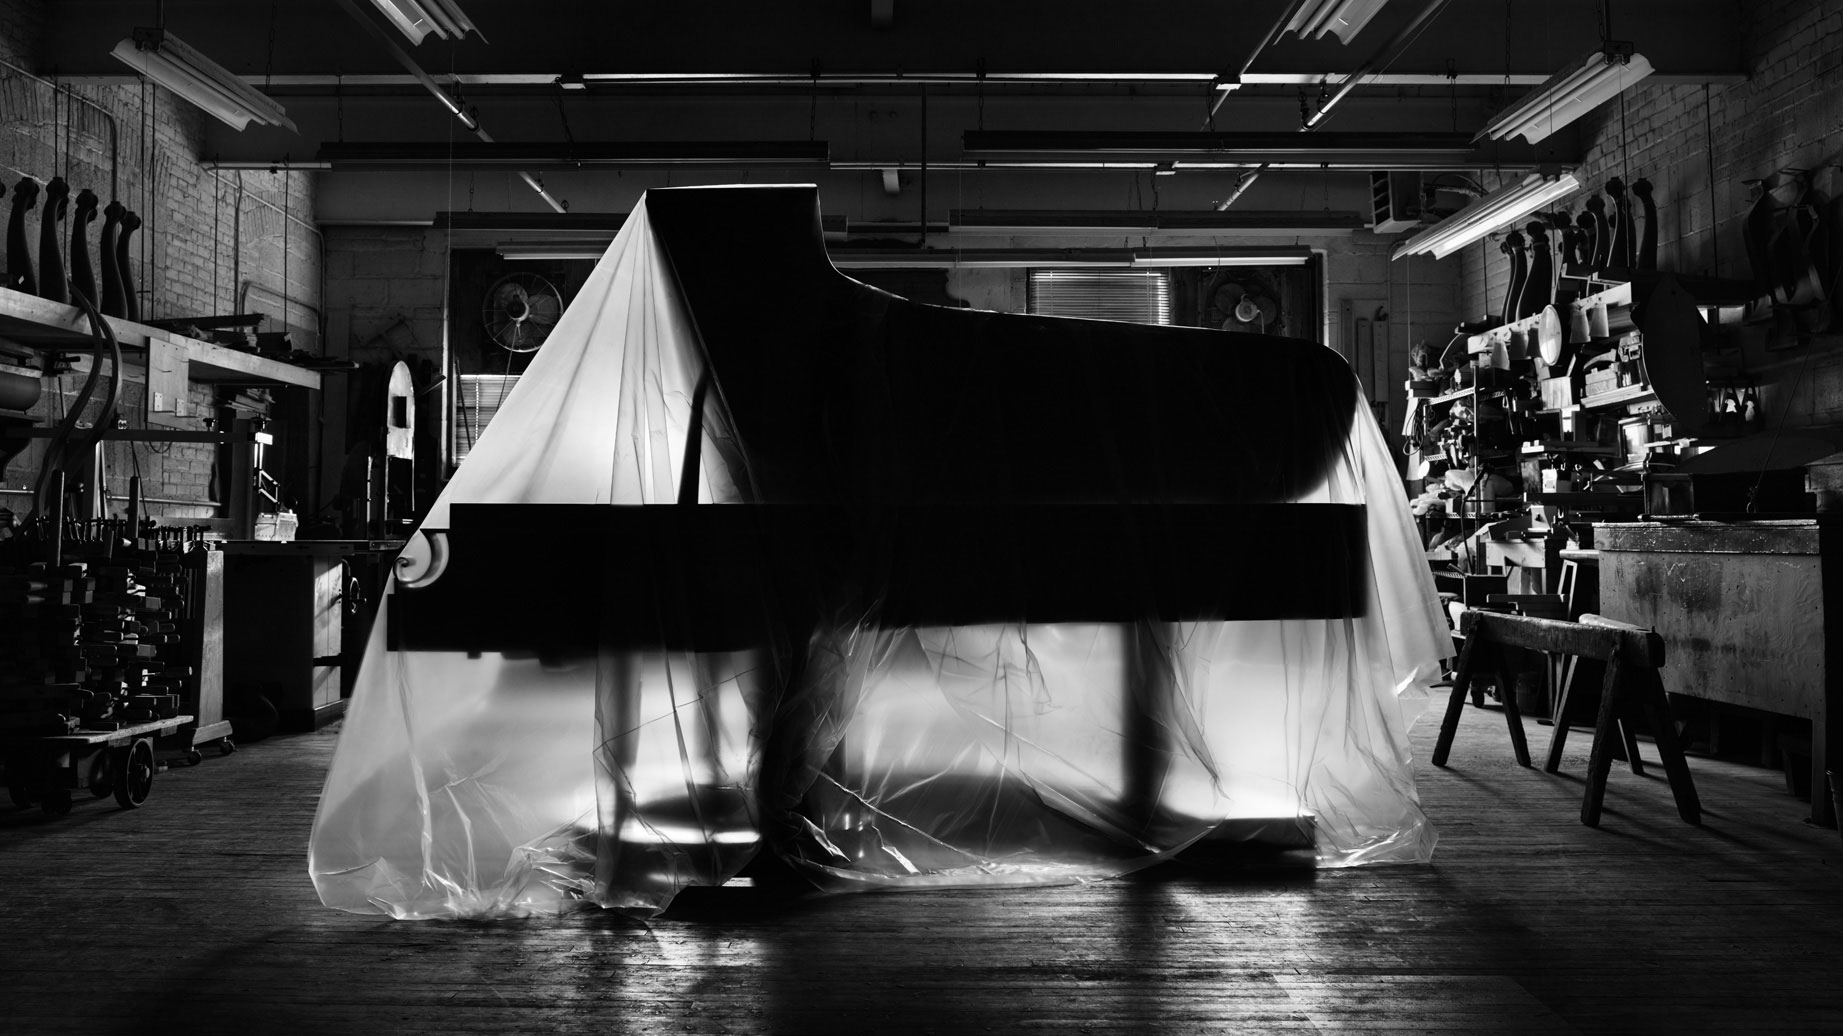 Steinway and Sons, 1 in 100,000 Bespoke Piano Imagery